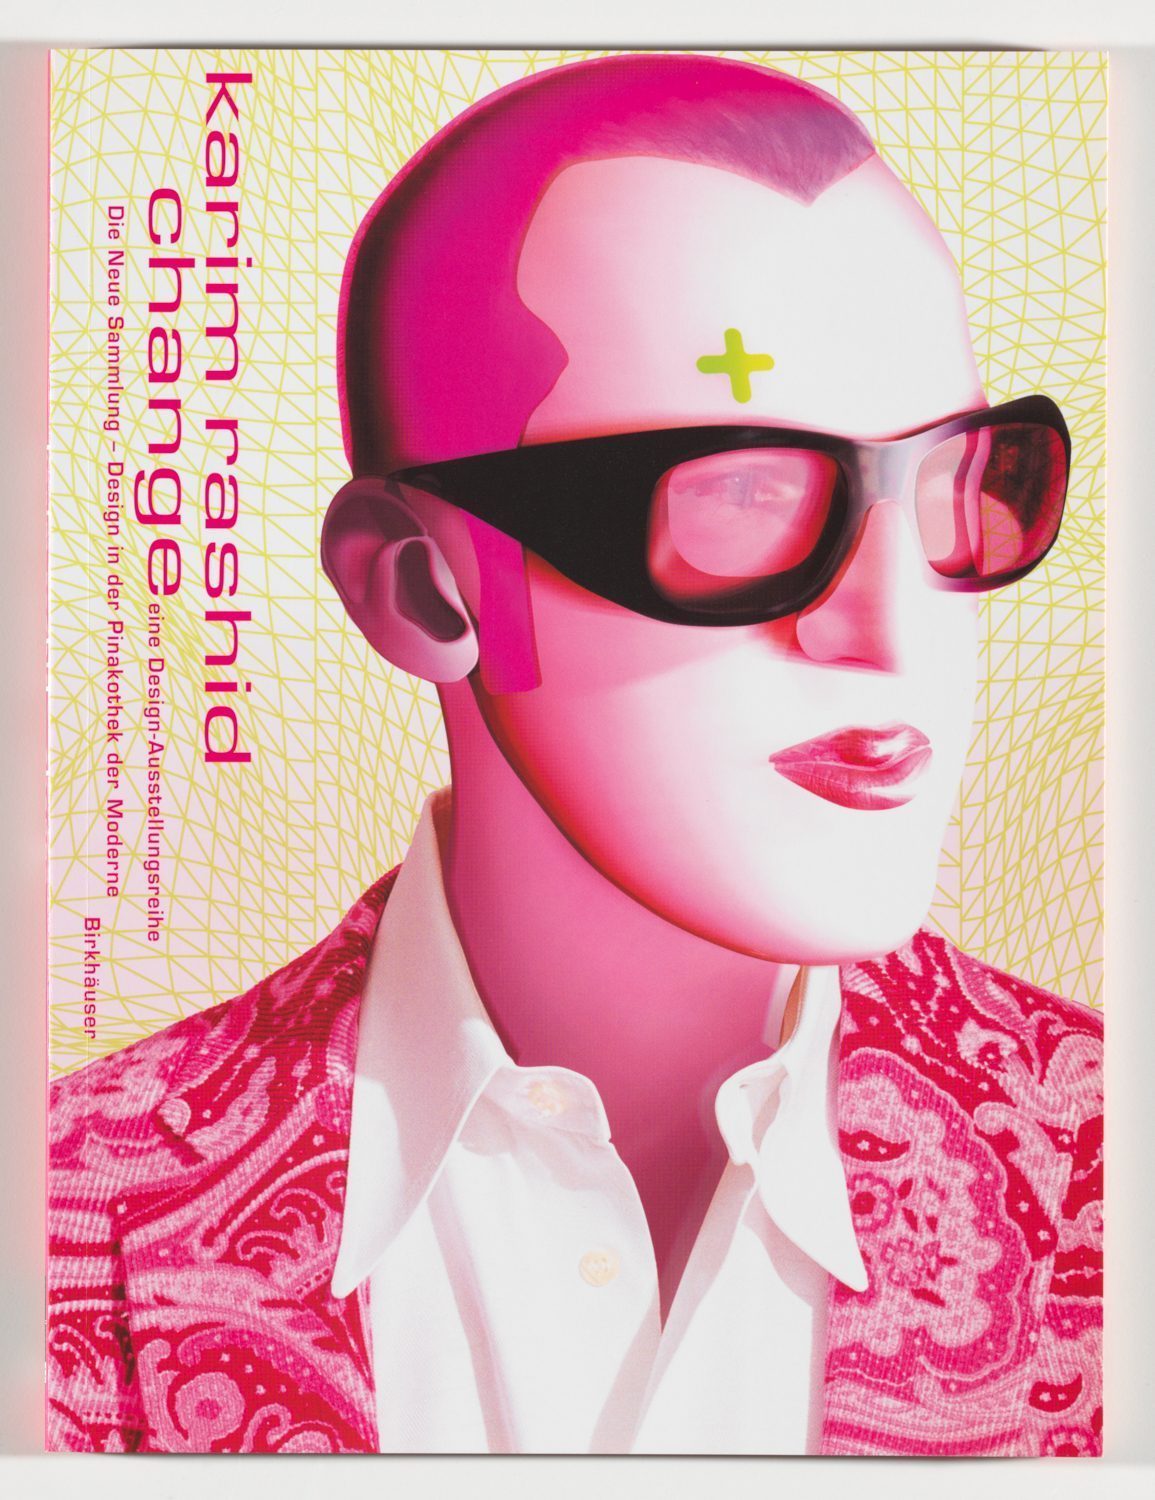 Three-quarter-view shoulder portrait of Karim Rashid, painted in a pop-art style, wearing sunglasses. A grey cross above his right brow. Inscription on the left from top to bottom: Karim Rashid change. The predominant colour is pink.